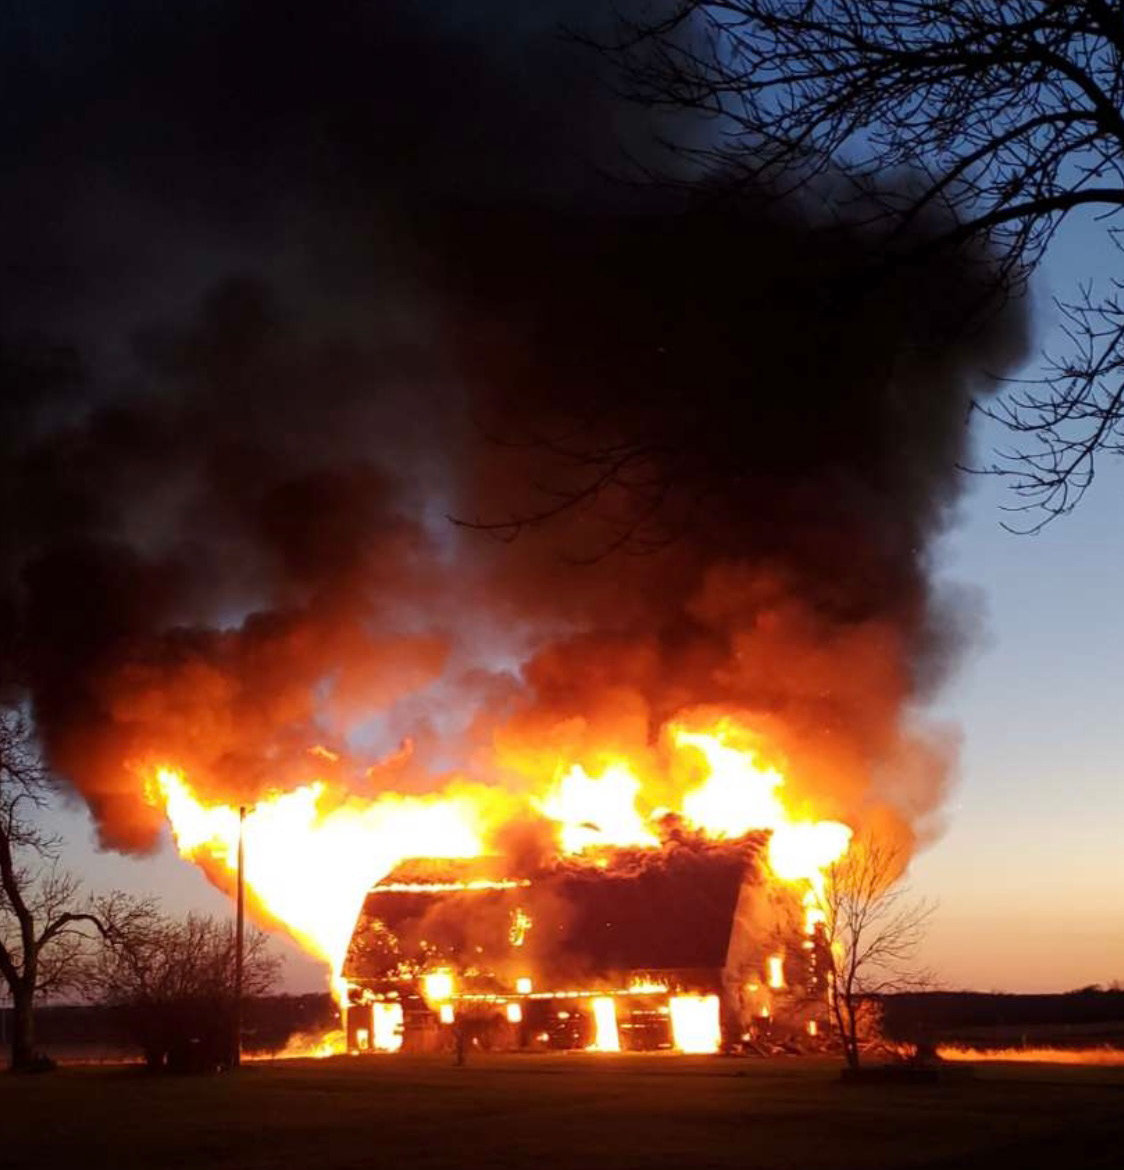 A calm South Dakota night plus four inches of rain last week made it the perfect night on Saturday to burn down a collapsing barn on Casey Anderson's acreage just south of Oldham.